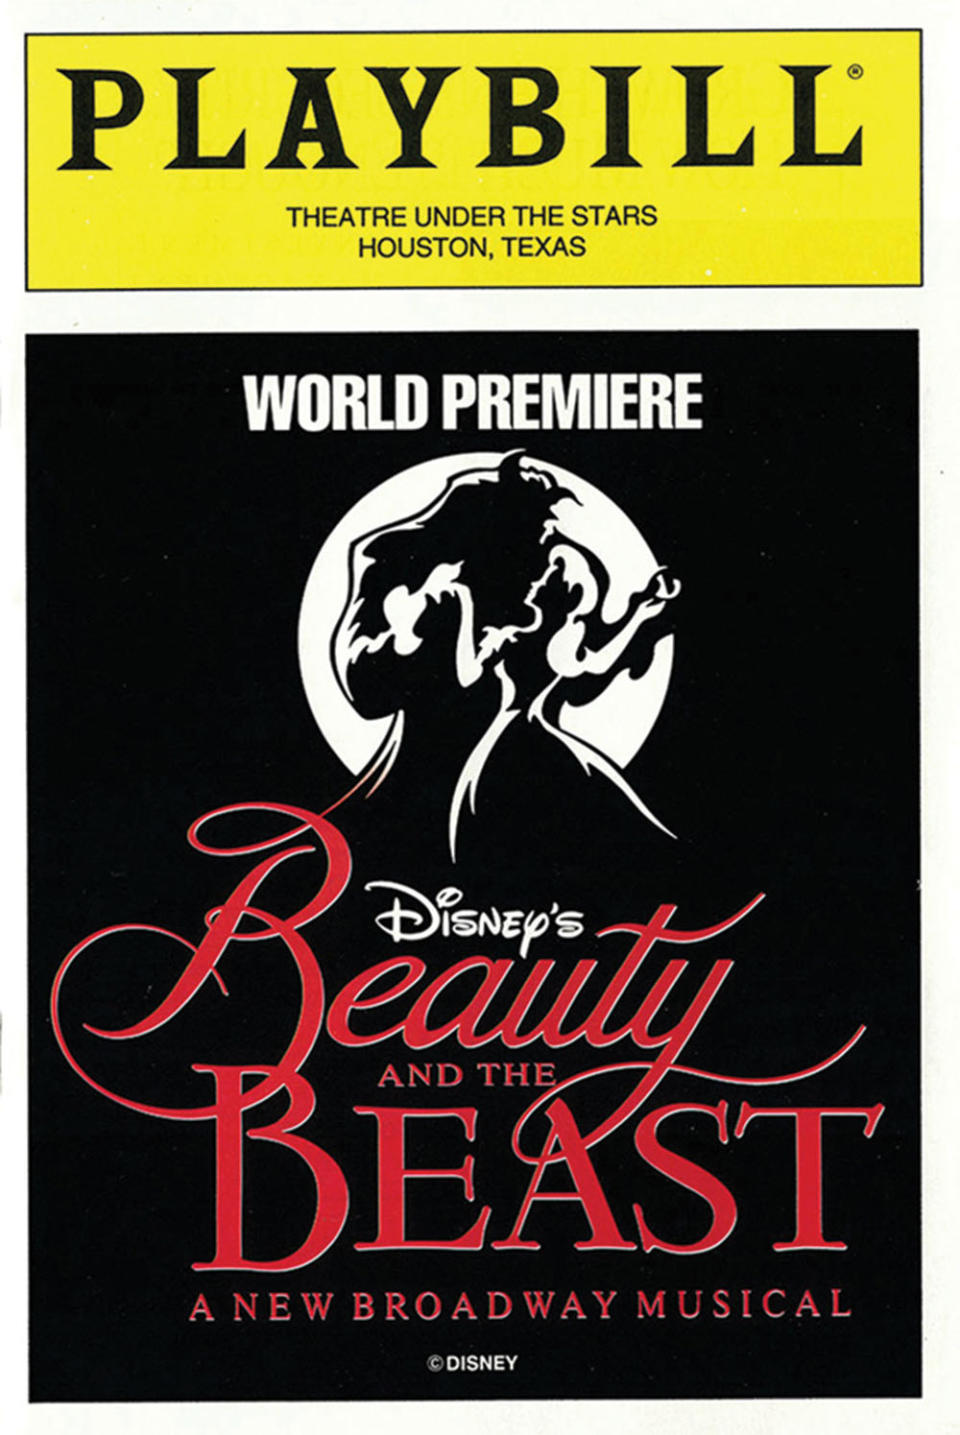 The stage adaptation of the movie Beauty and the Beast was among several Broadway hits for Disney